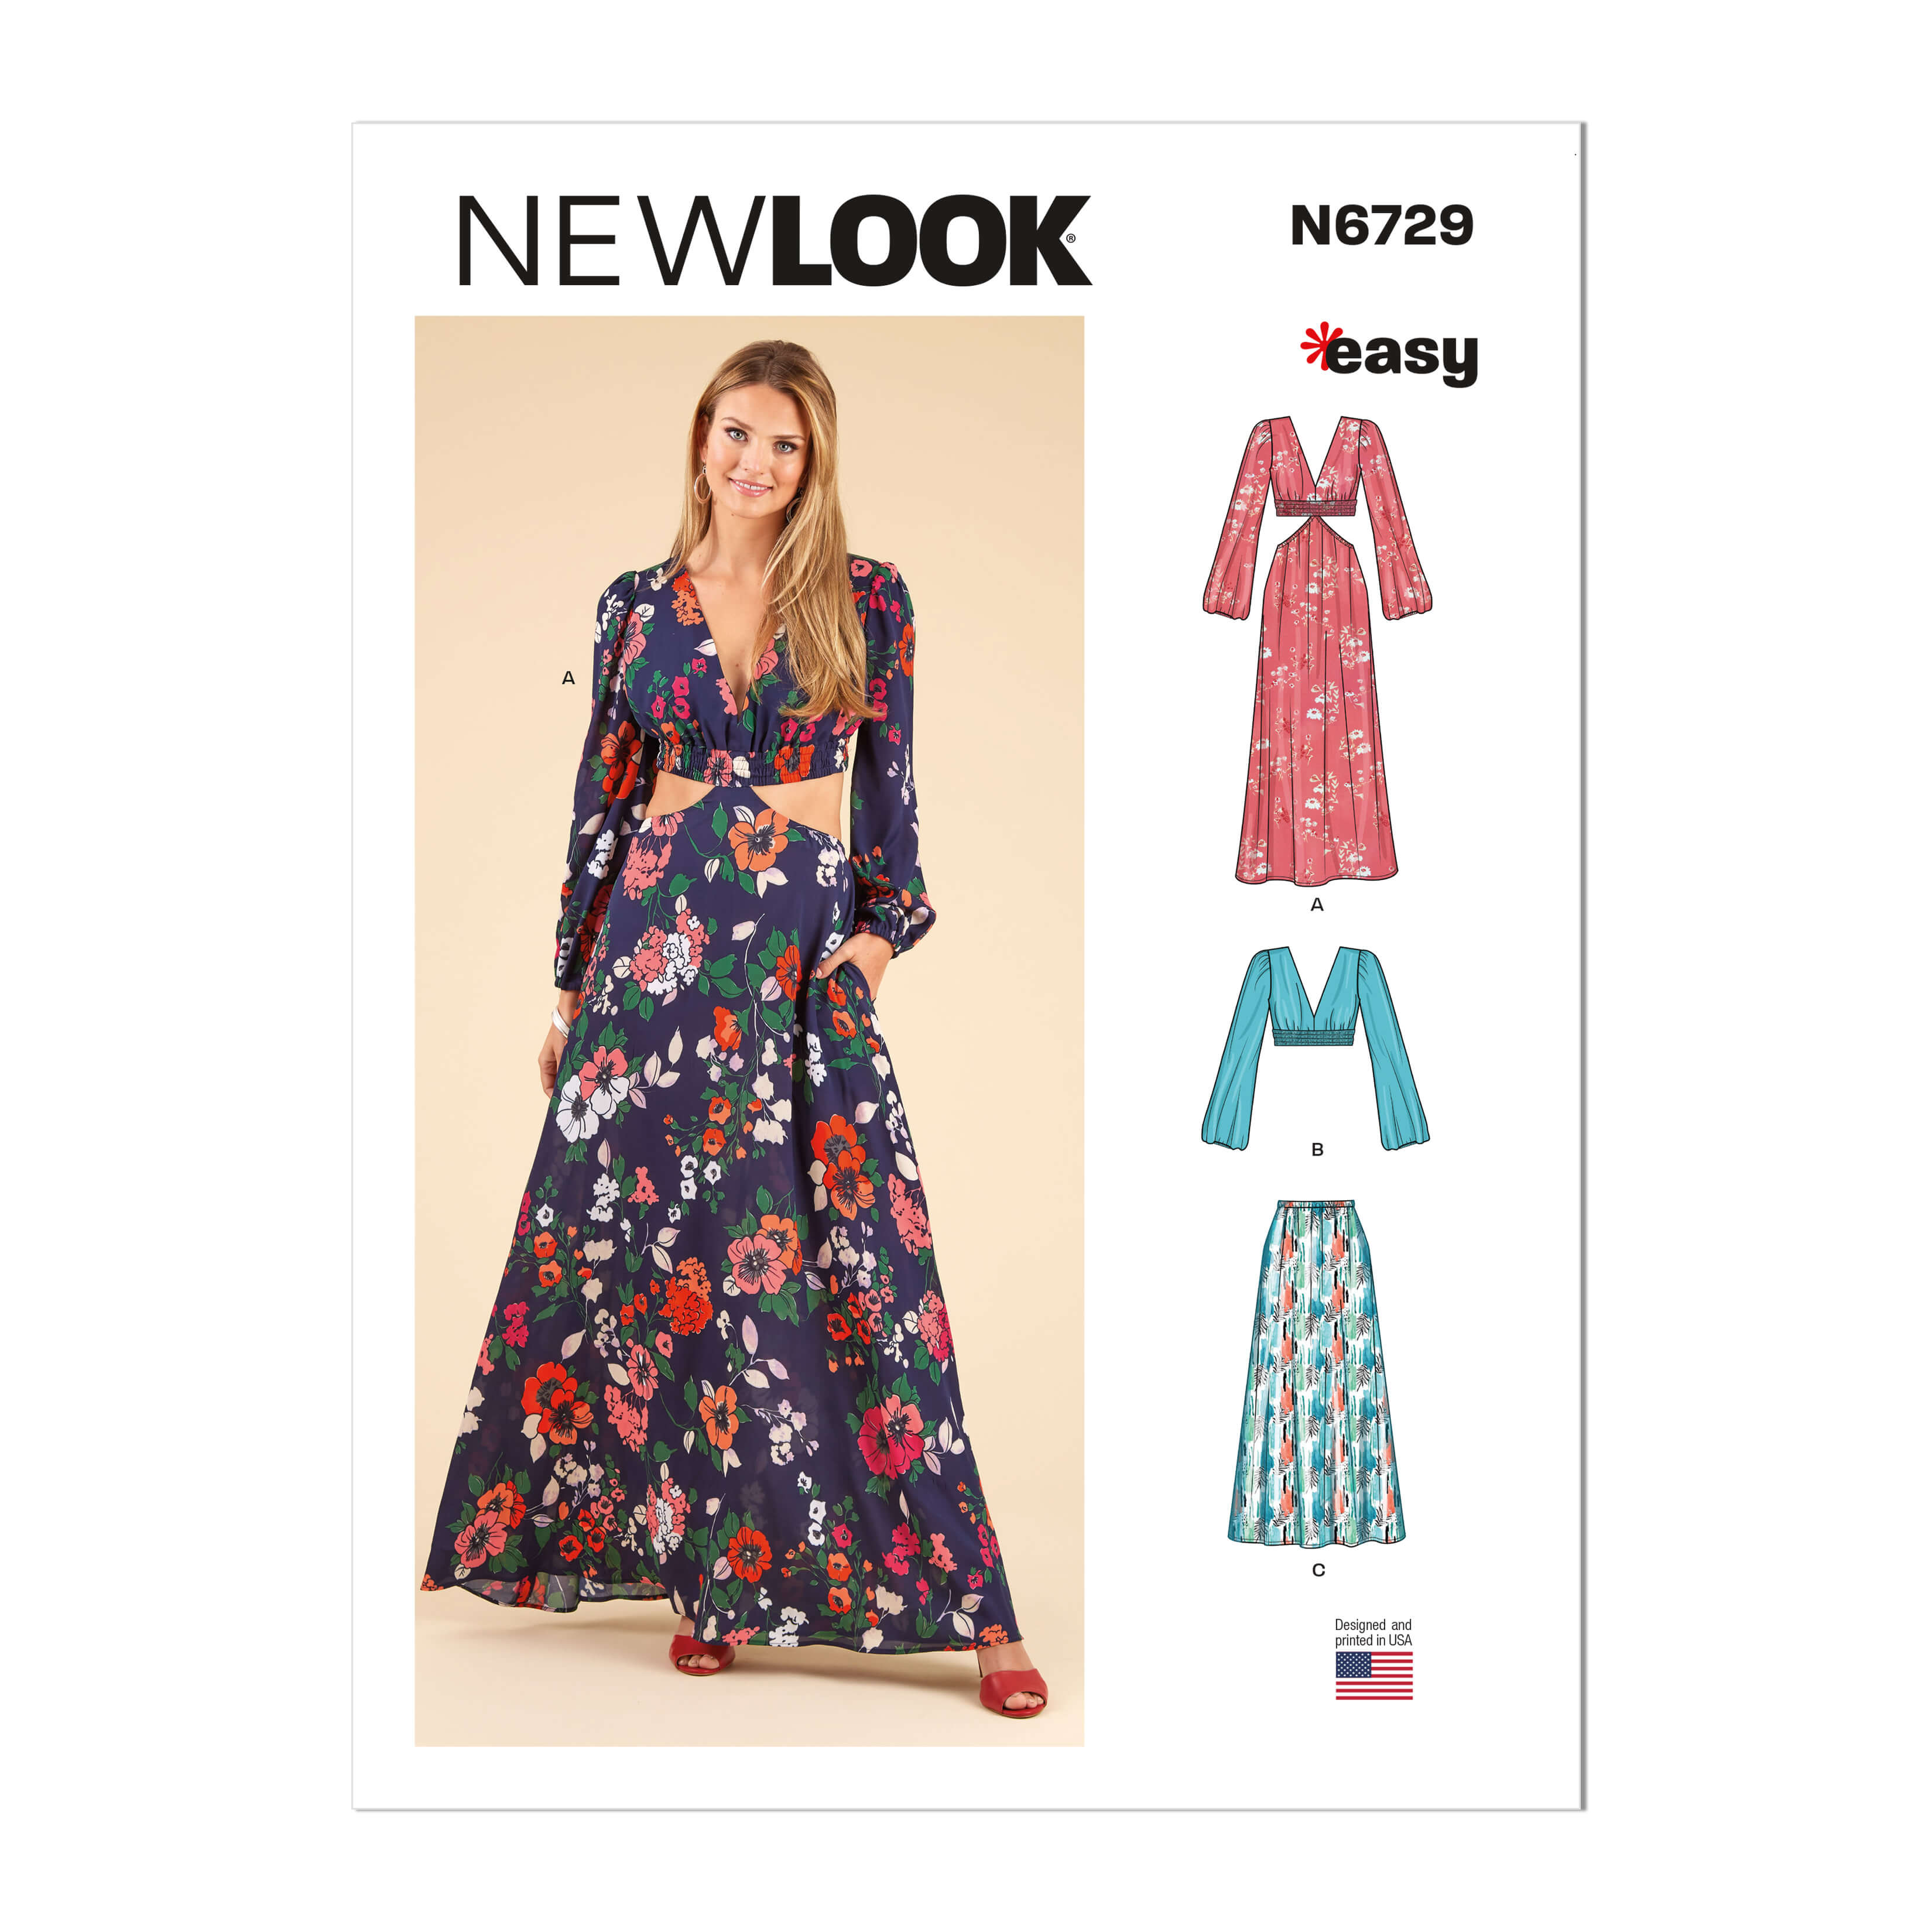 New Look Sewing Pattern N6729 Misses' Dress, Top and Skirt